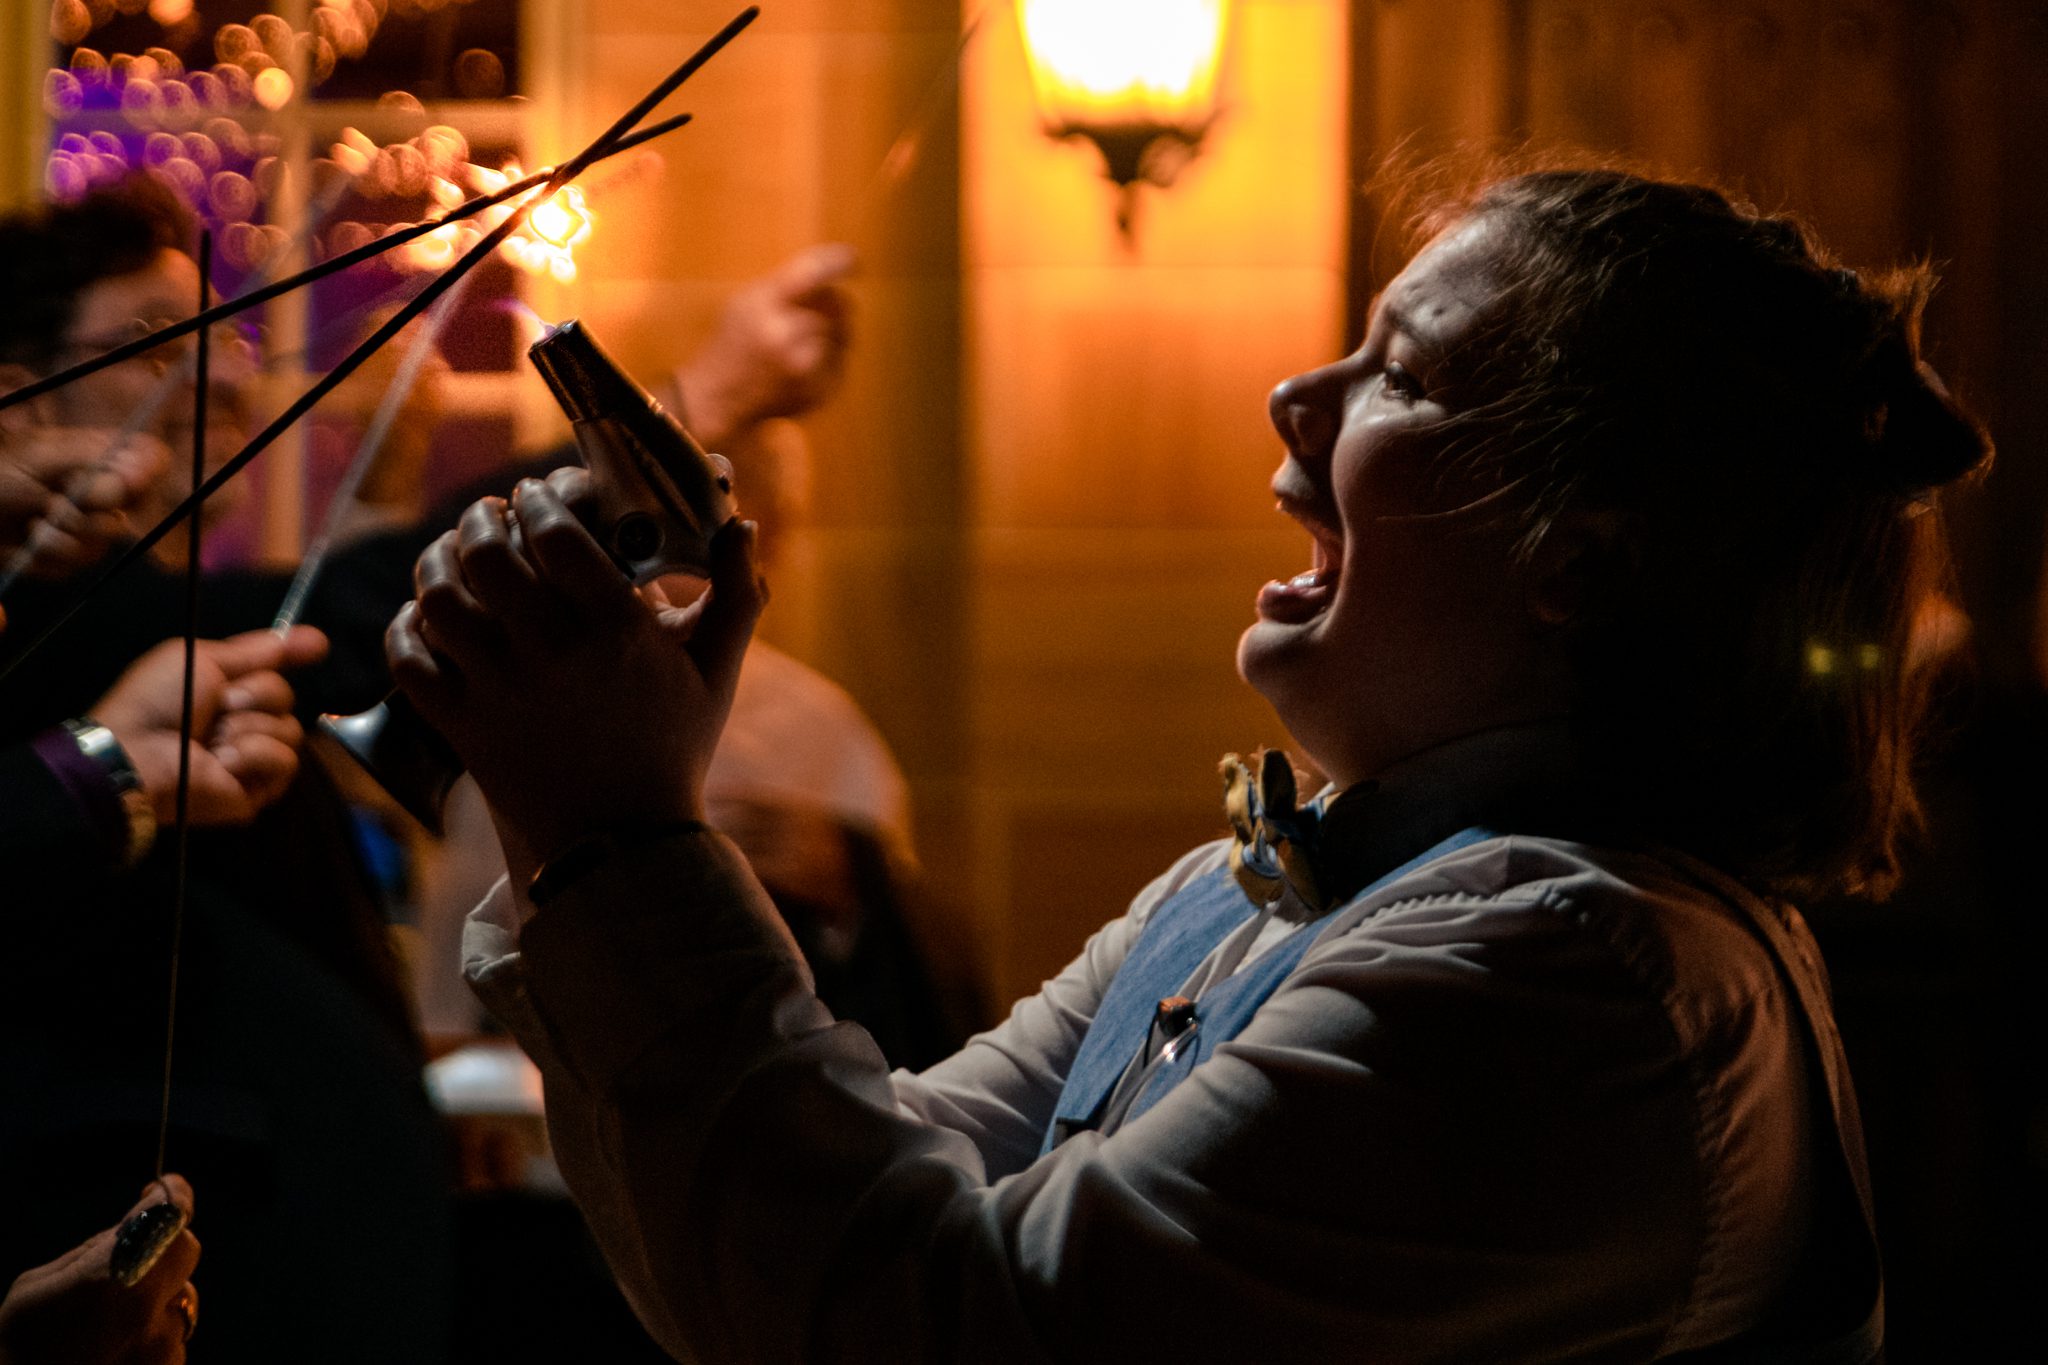 a member of the ridge asheville staff lights sparklers